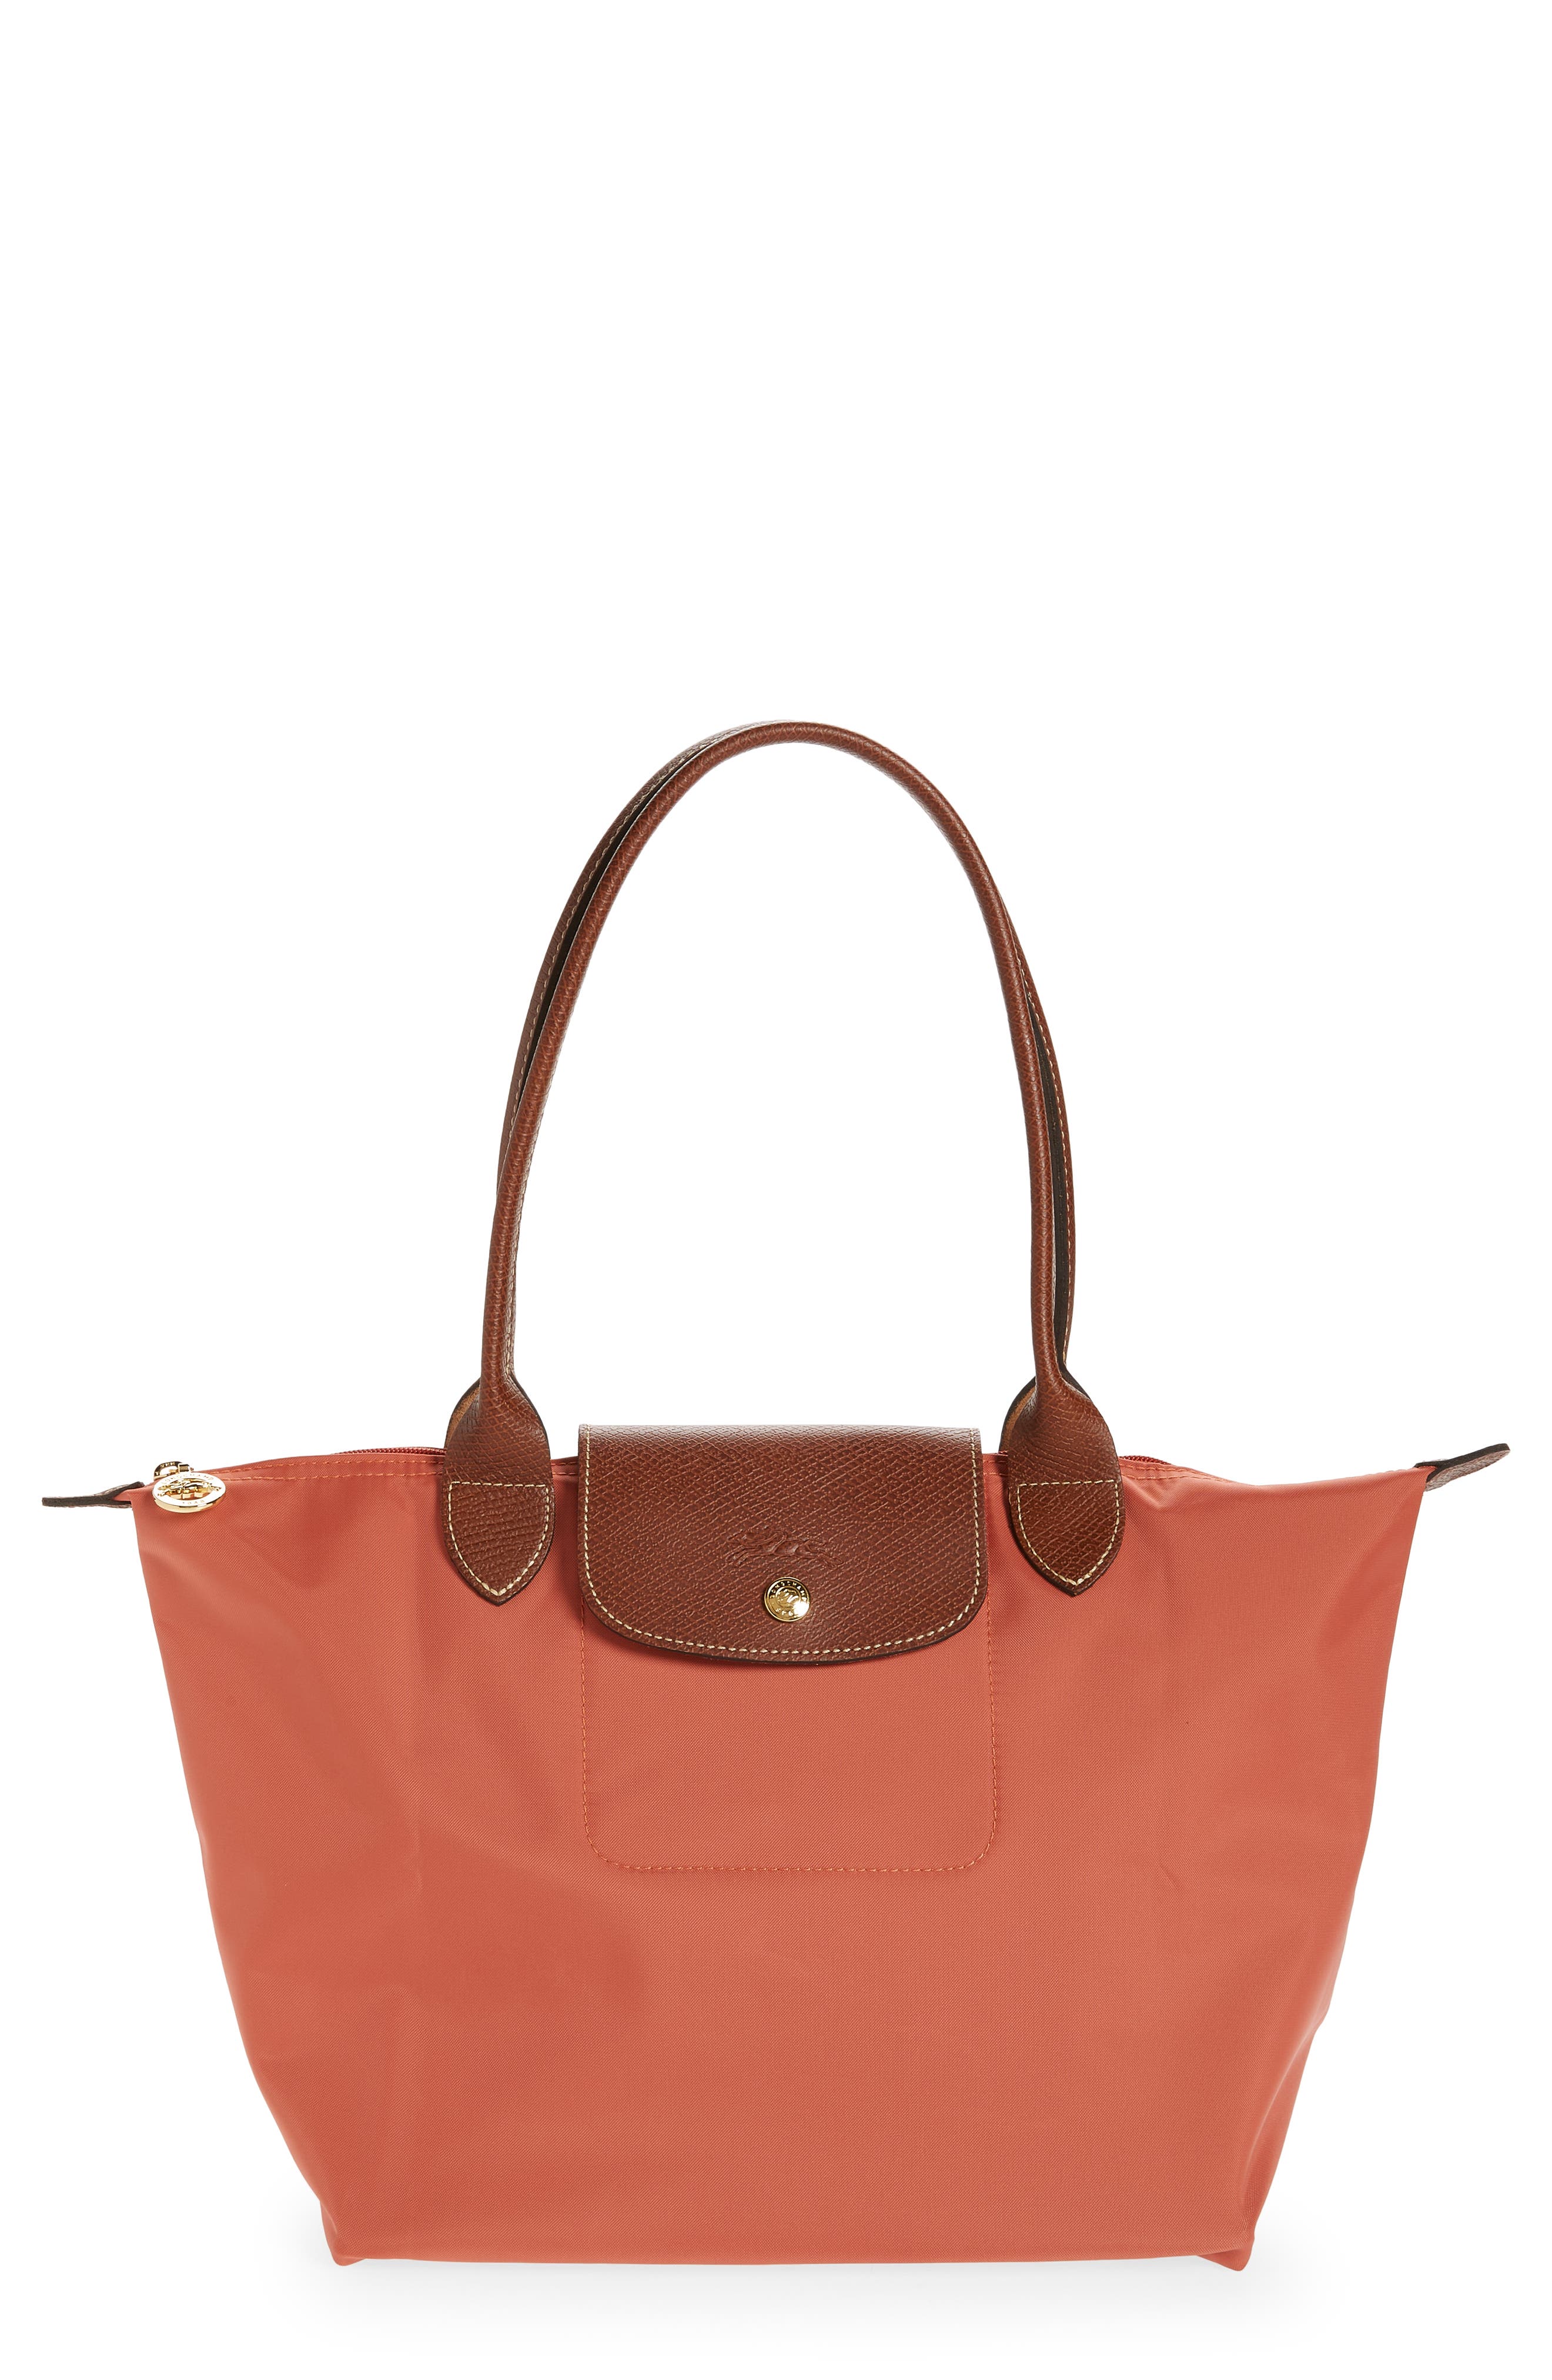 Longchamp Small Le Pliage Nylon Shoulder Tote in Blush at Nordstrom